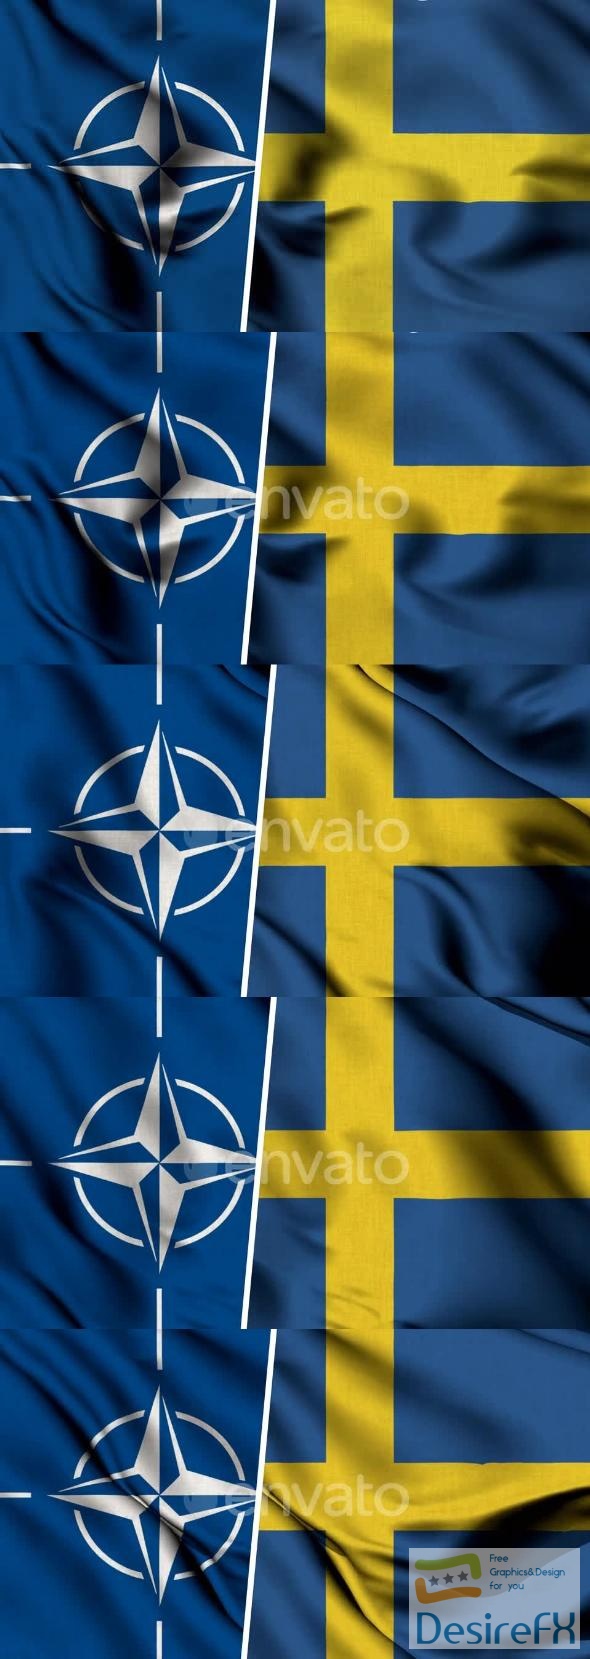 VideoHive Nato Flag And Flag Of Sweden 47577793